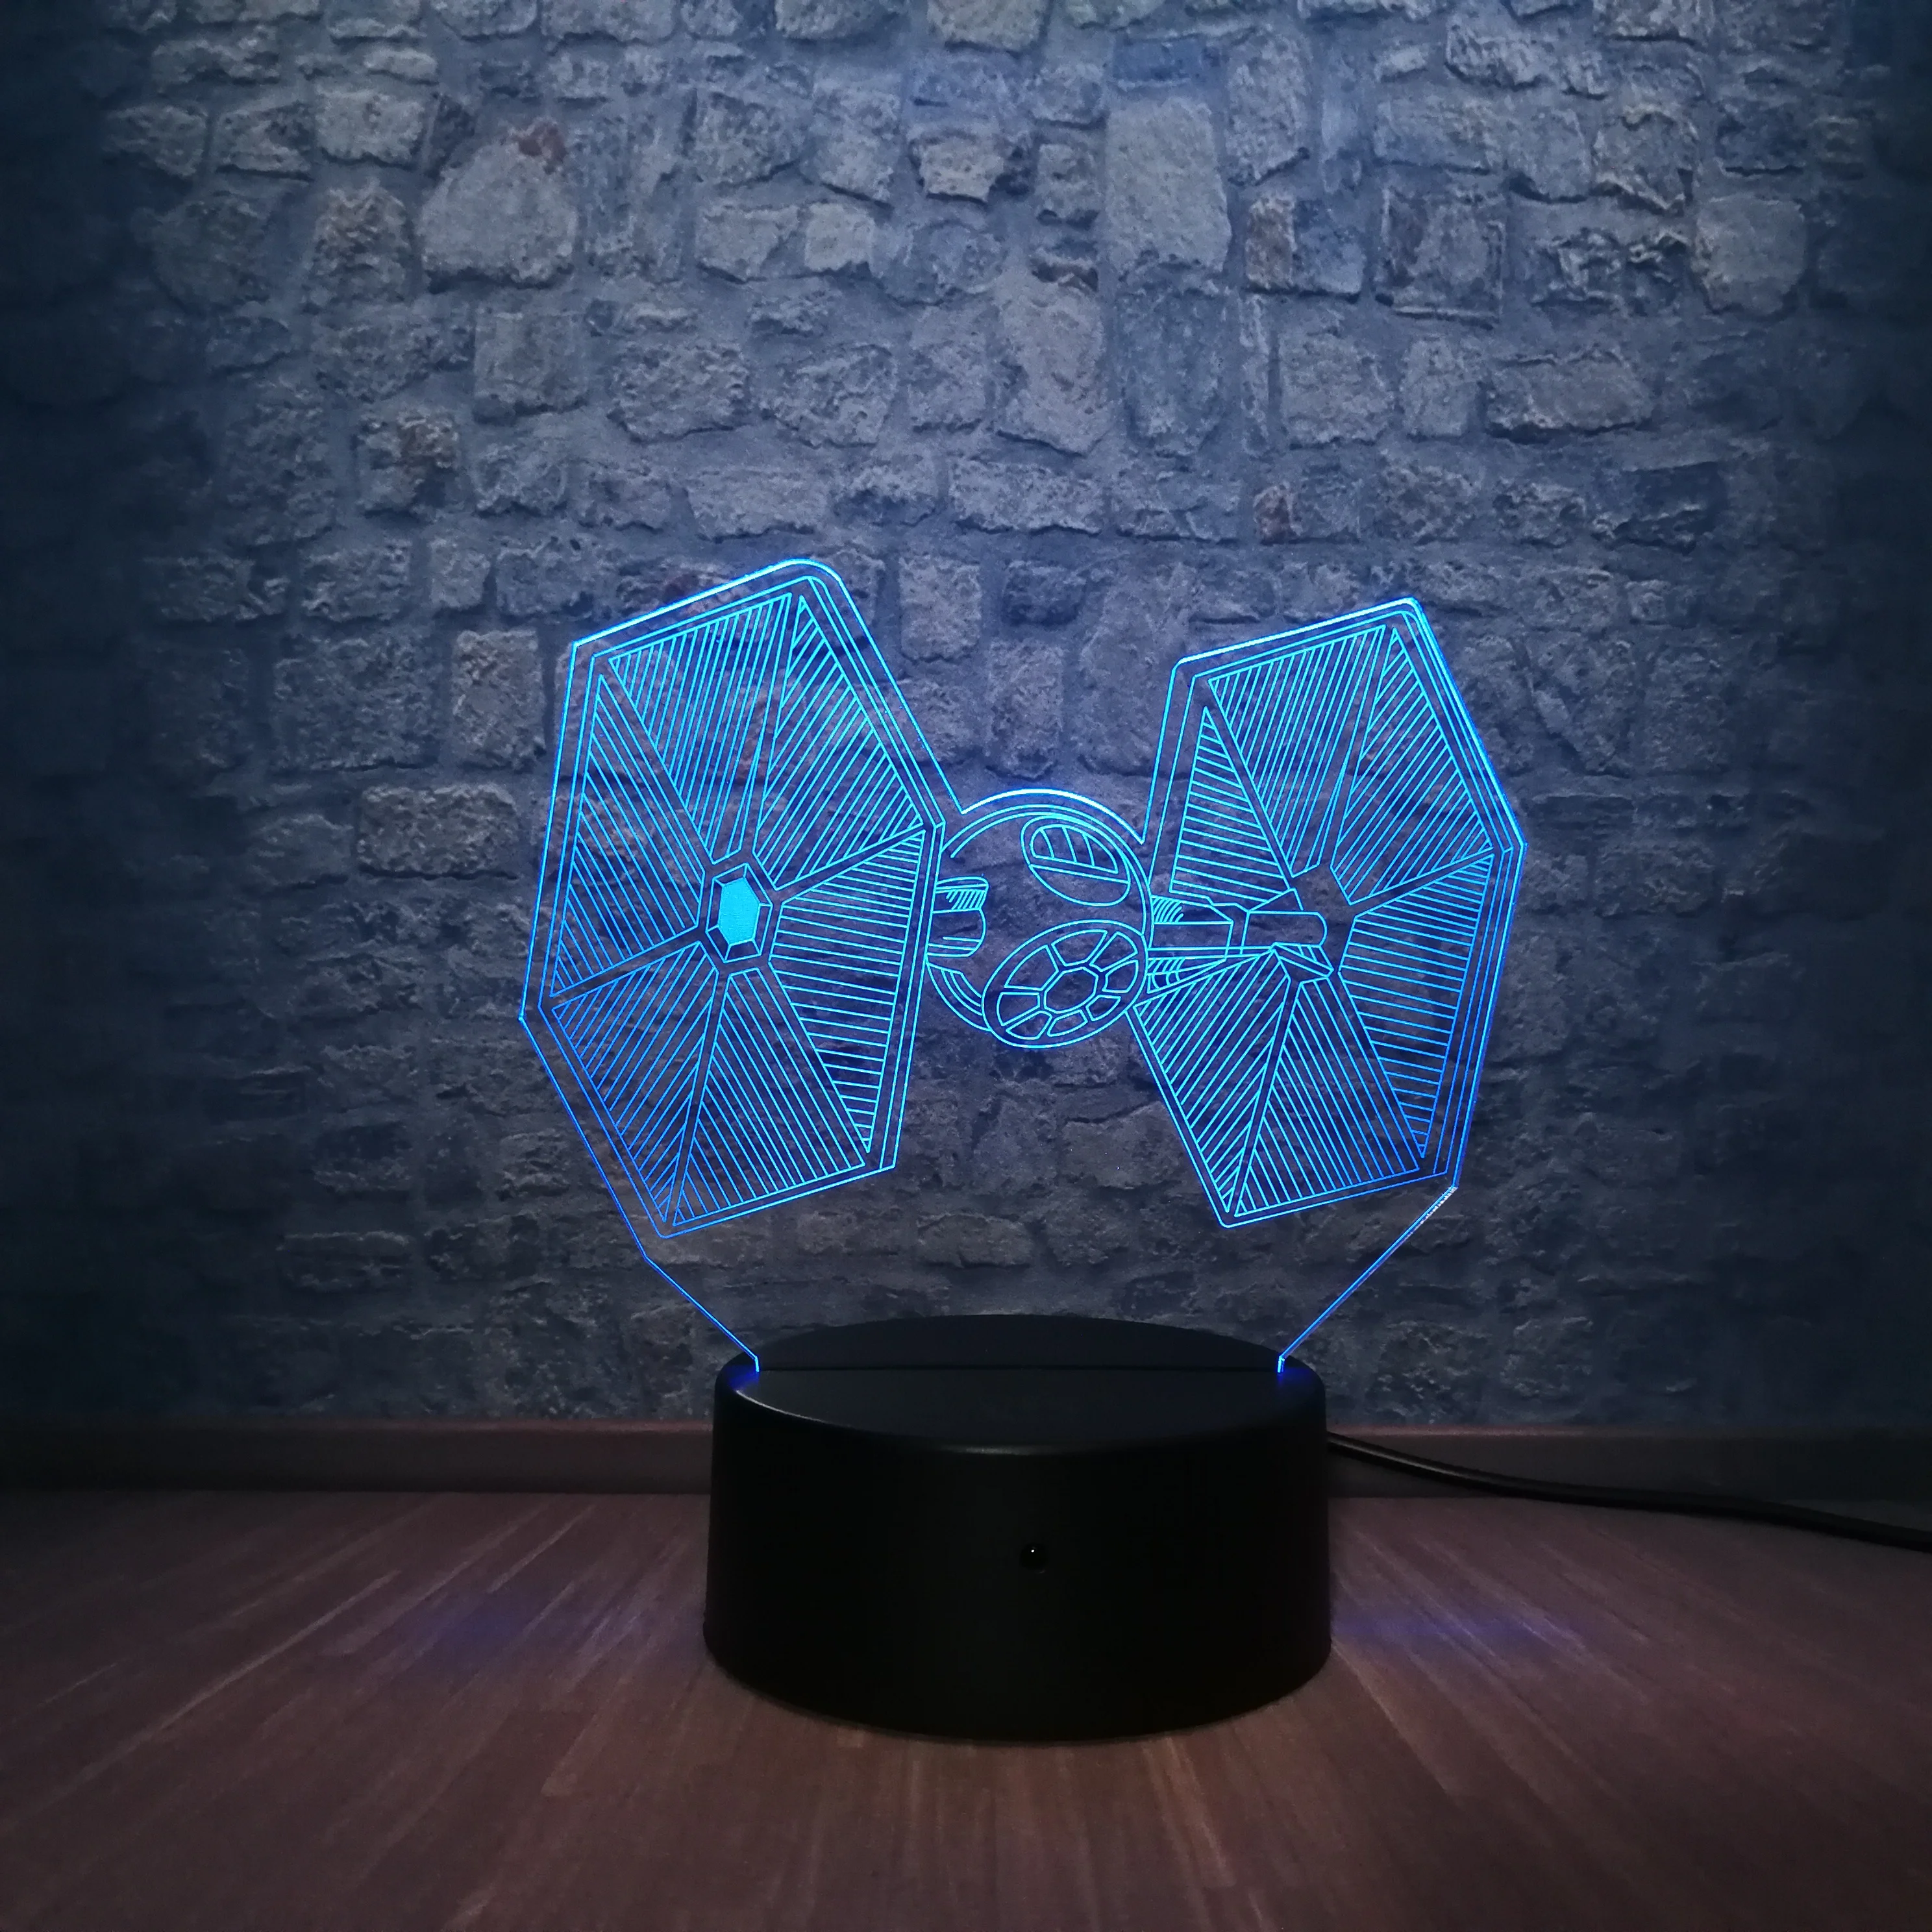 

HOT SALE Vader Tie Fighter Portable Lantern 3D LED Lamp RGB Lighting 7 Color Change Night Light Home Decor Kid Birthday Gift, 7 colors